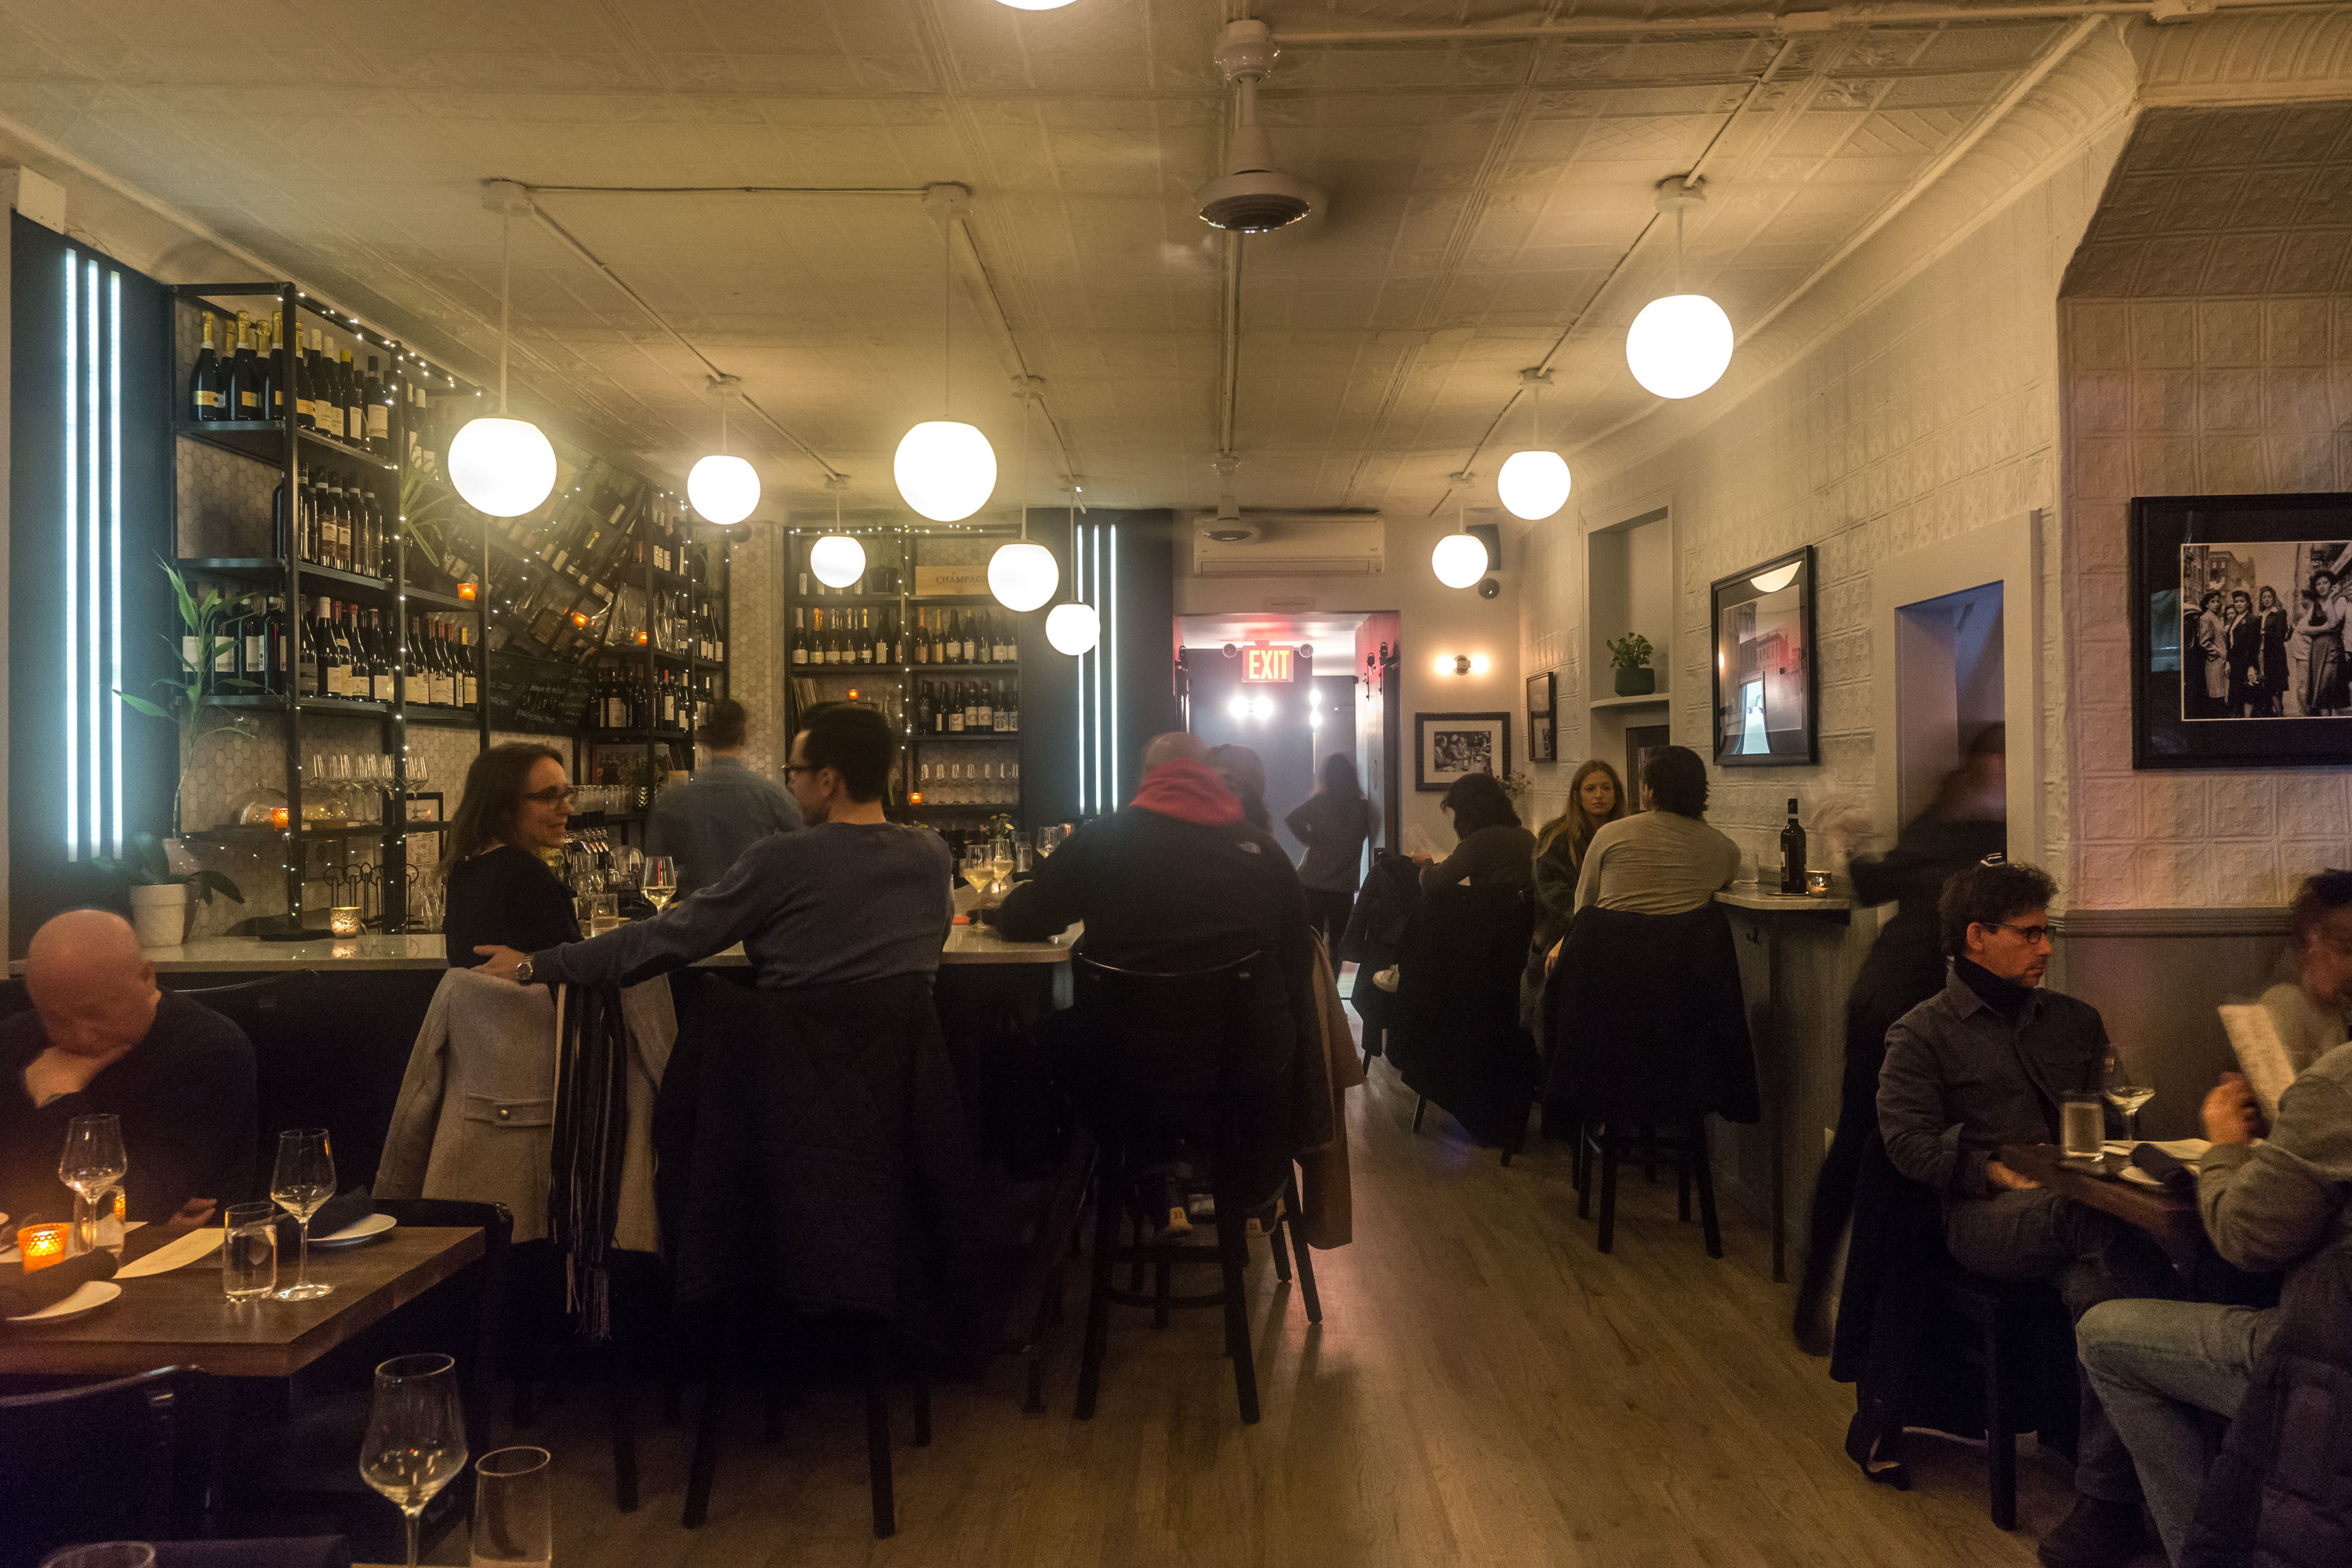 Williamsburg gets a new wine bar focused on organic bottles and cheese ...